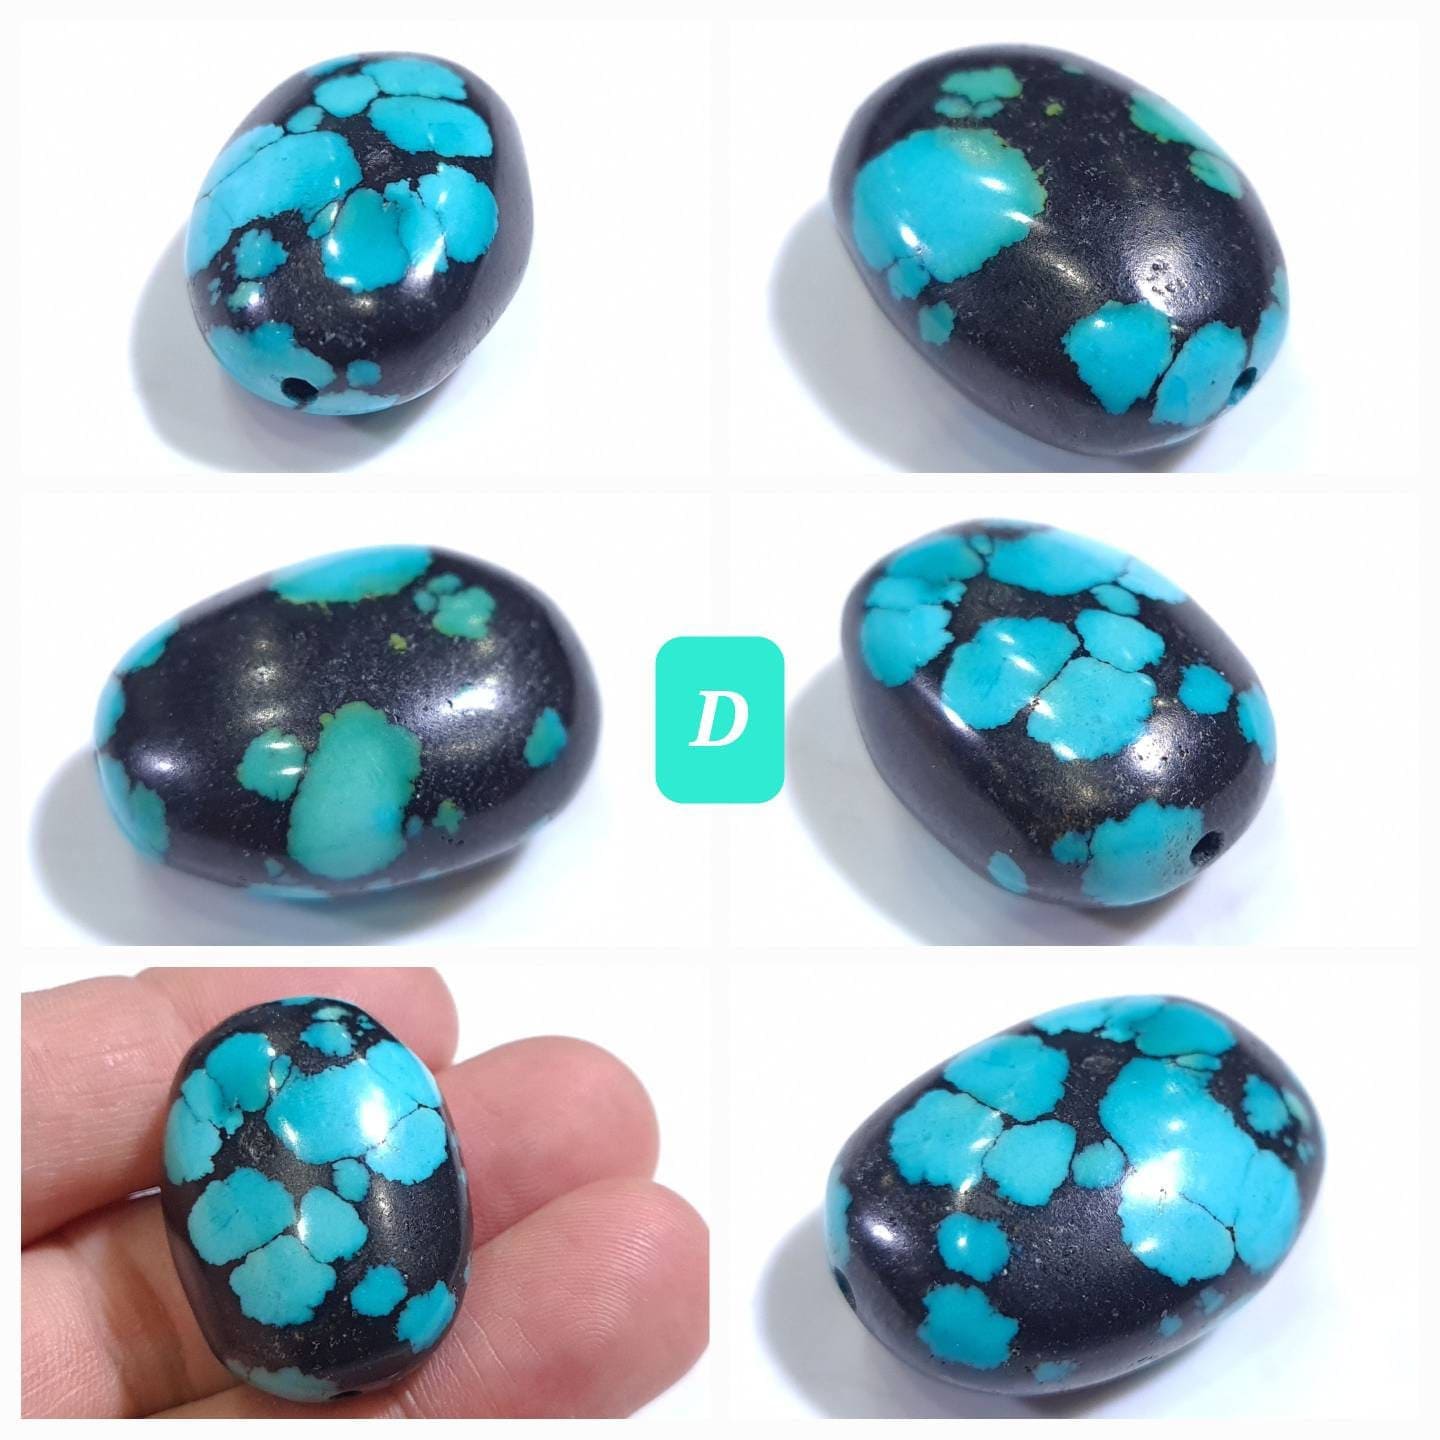 Genuine Turquoise Pebble, AAA Tibetian Spiderweb Turquoise pebble for jewelry Focal, pendant, palm stone, collection healing gem